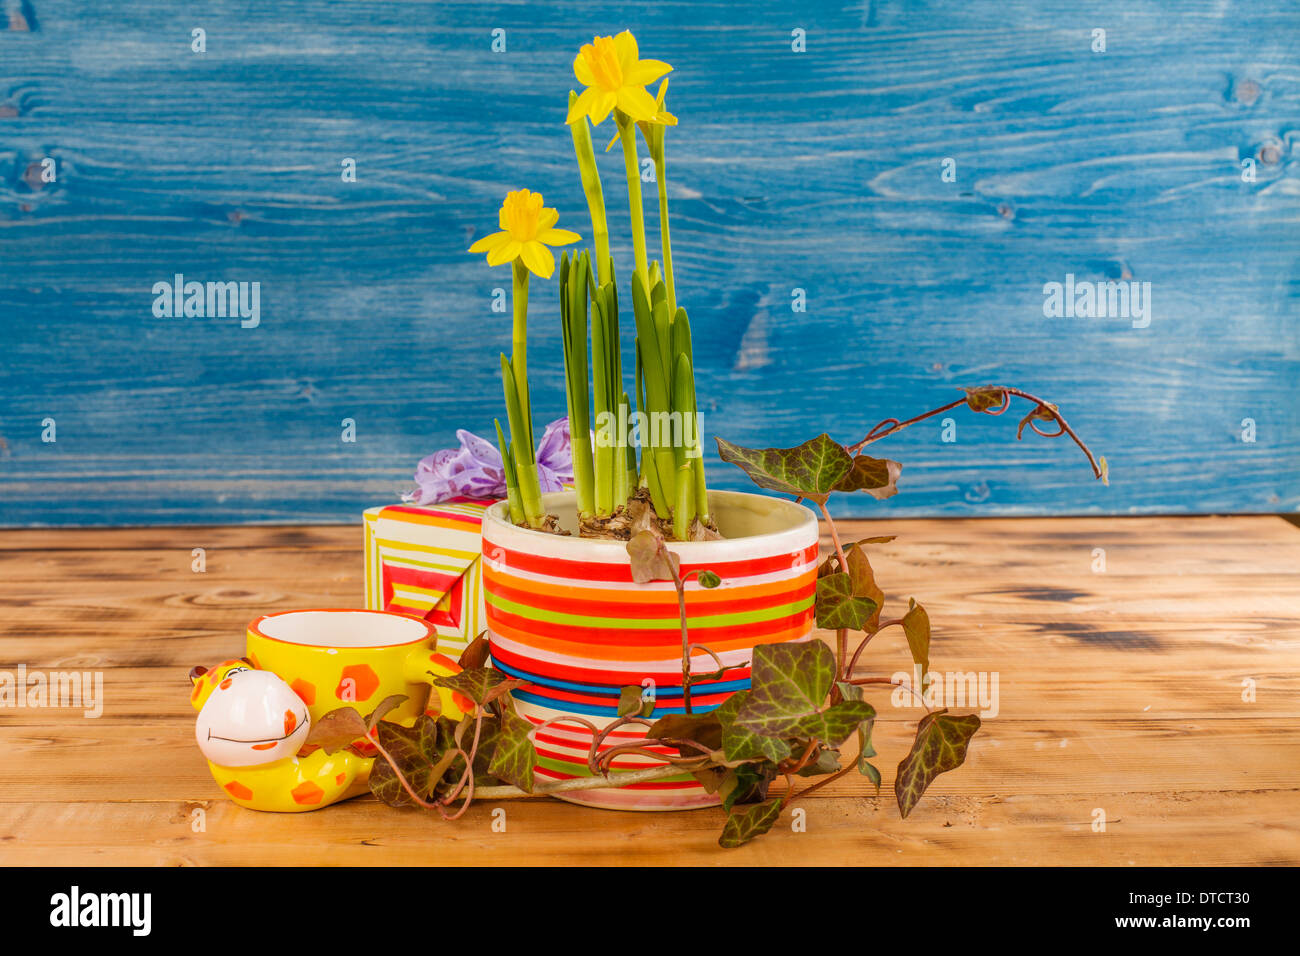 Easter decoration with daffodils in pot and Easter basket, porcelain turtle Stock Photo